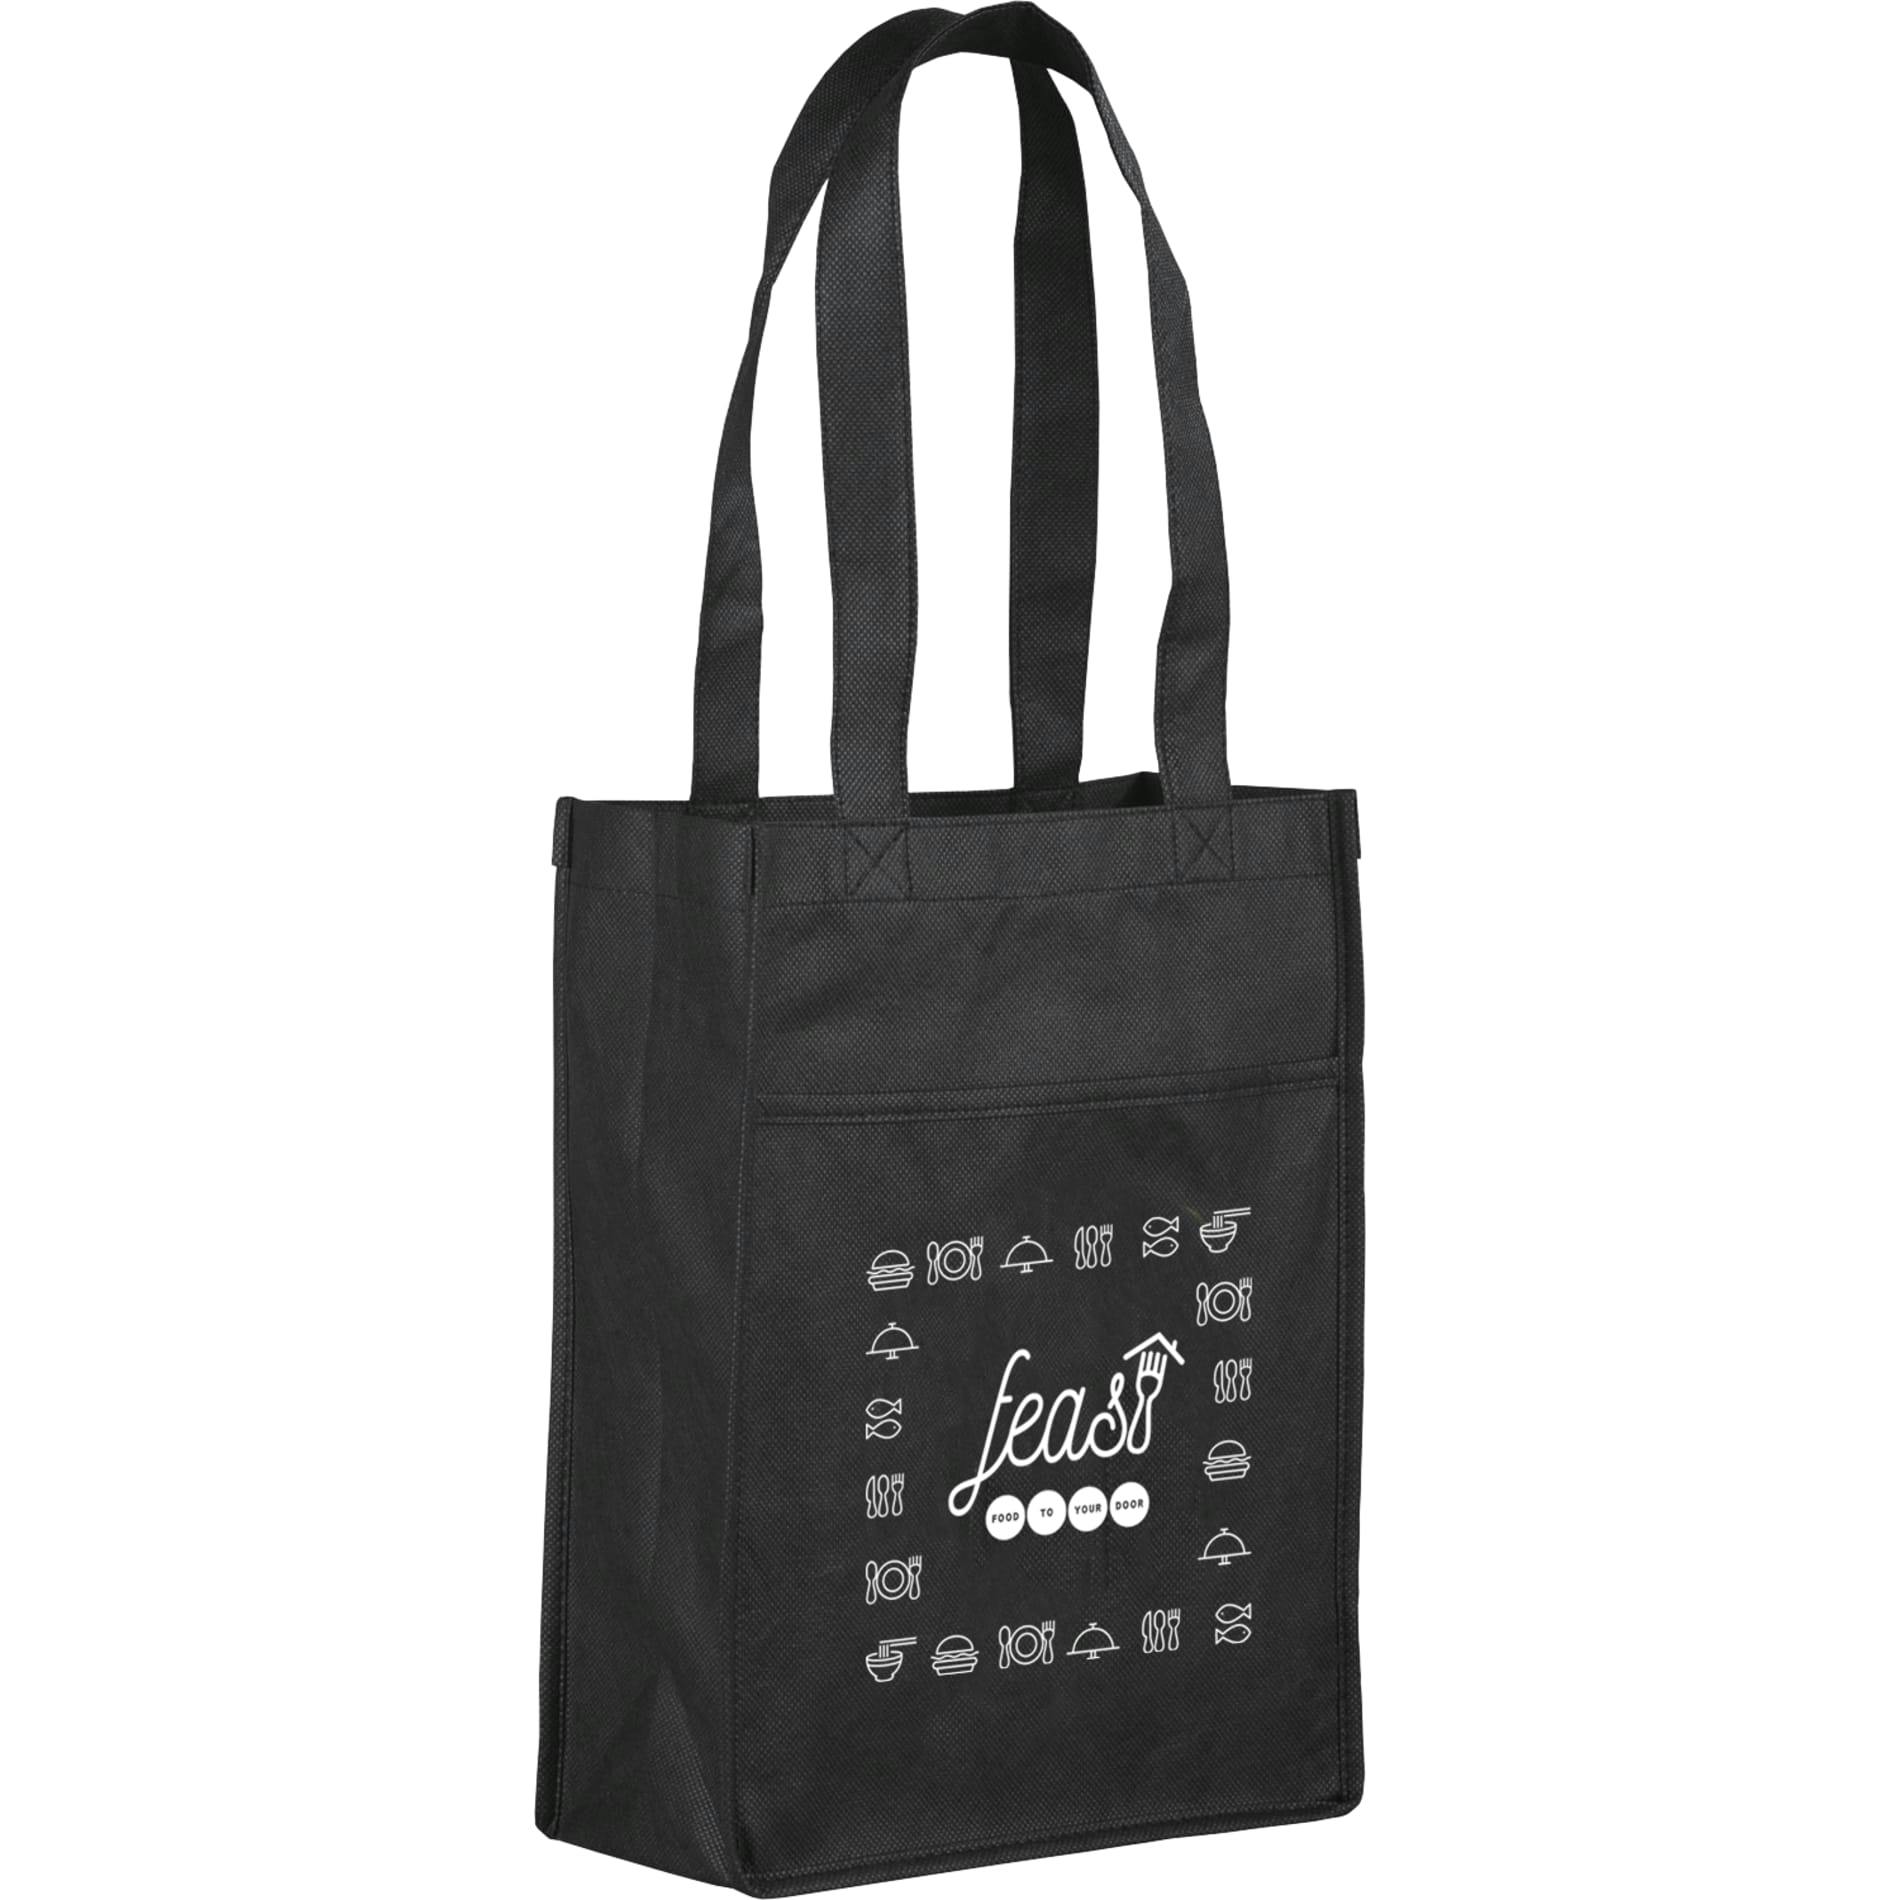 Custom Non-Woven Gift Tote with Pocket | Design Online